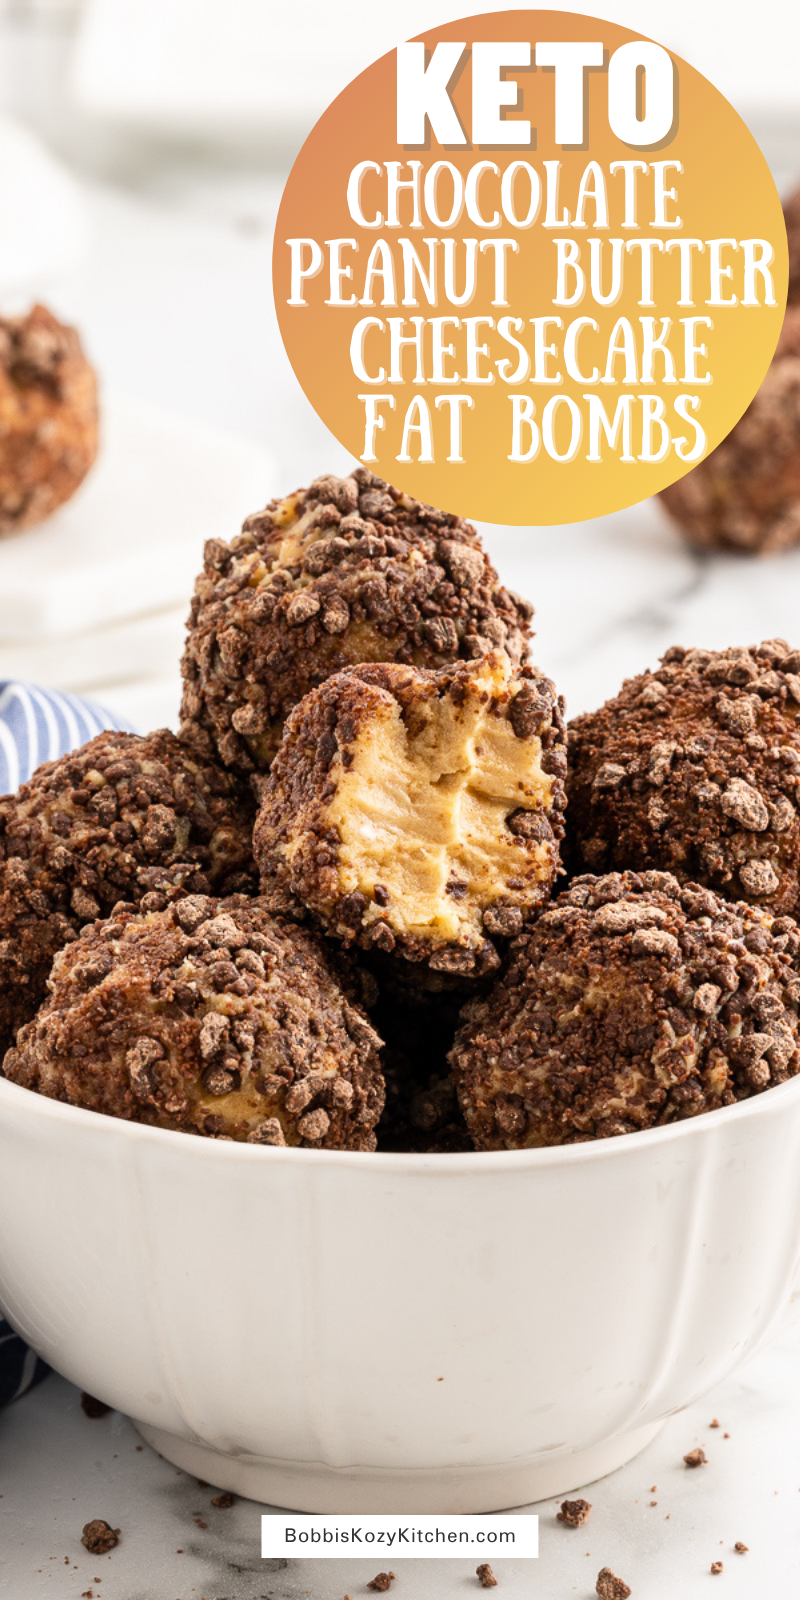 Chocolate Peanut Butter Cheesecake Fat Bombs - These creamy chocolate peanut butter cheesecake fat bombs are the perfect keto snack or dessert. Made with just 6 ingredients, they are as easy to make as they are delicious to eat, and, with just 2 net carbs per fat bomb, they are guilt-free too! #keto #lowcarb #sugarfree #chocolate #peanutbutter #cheesecake #fatbomb